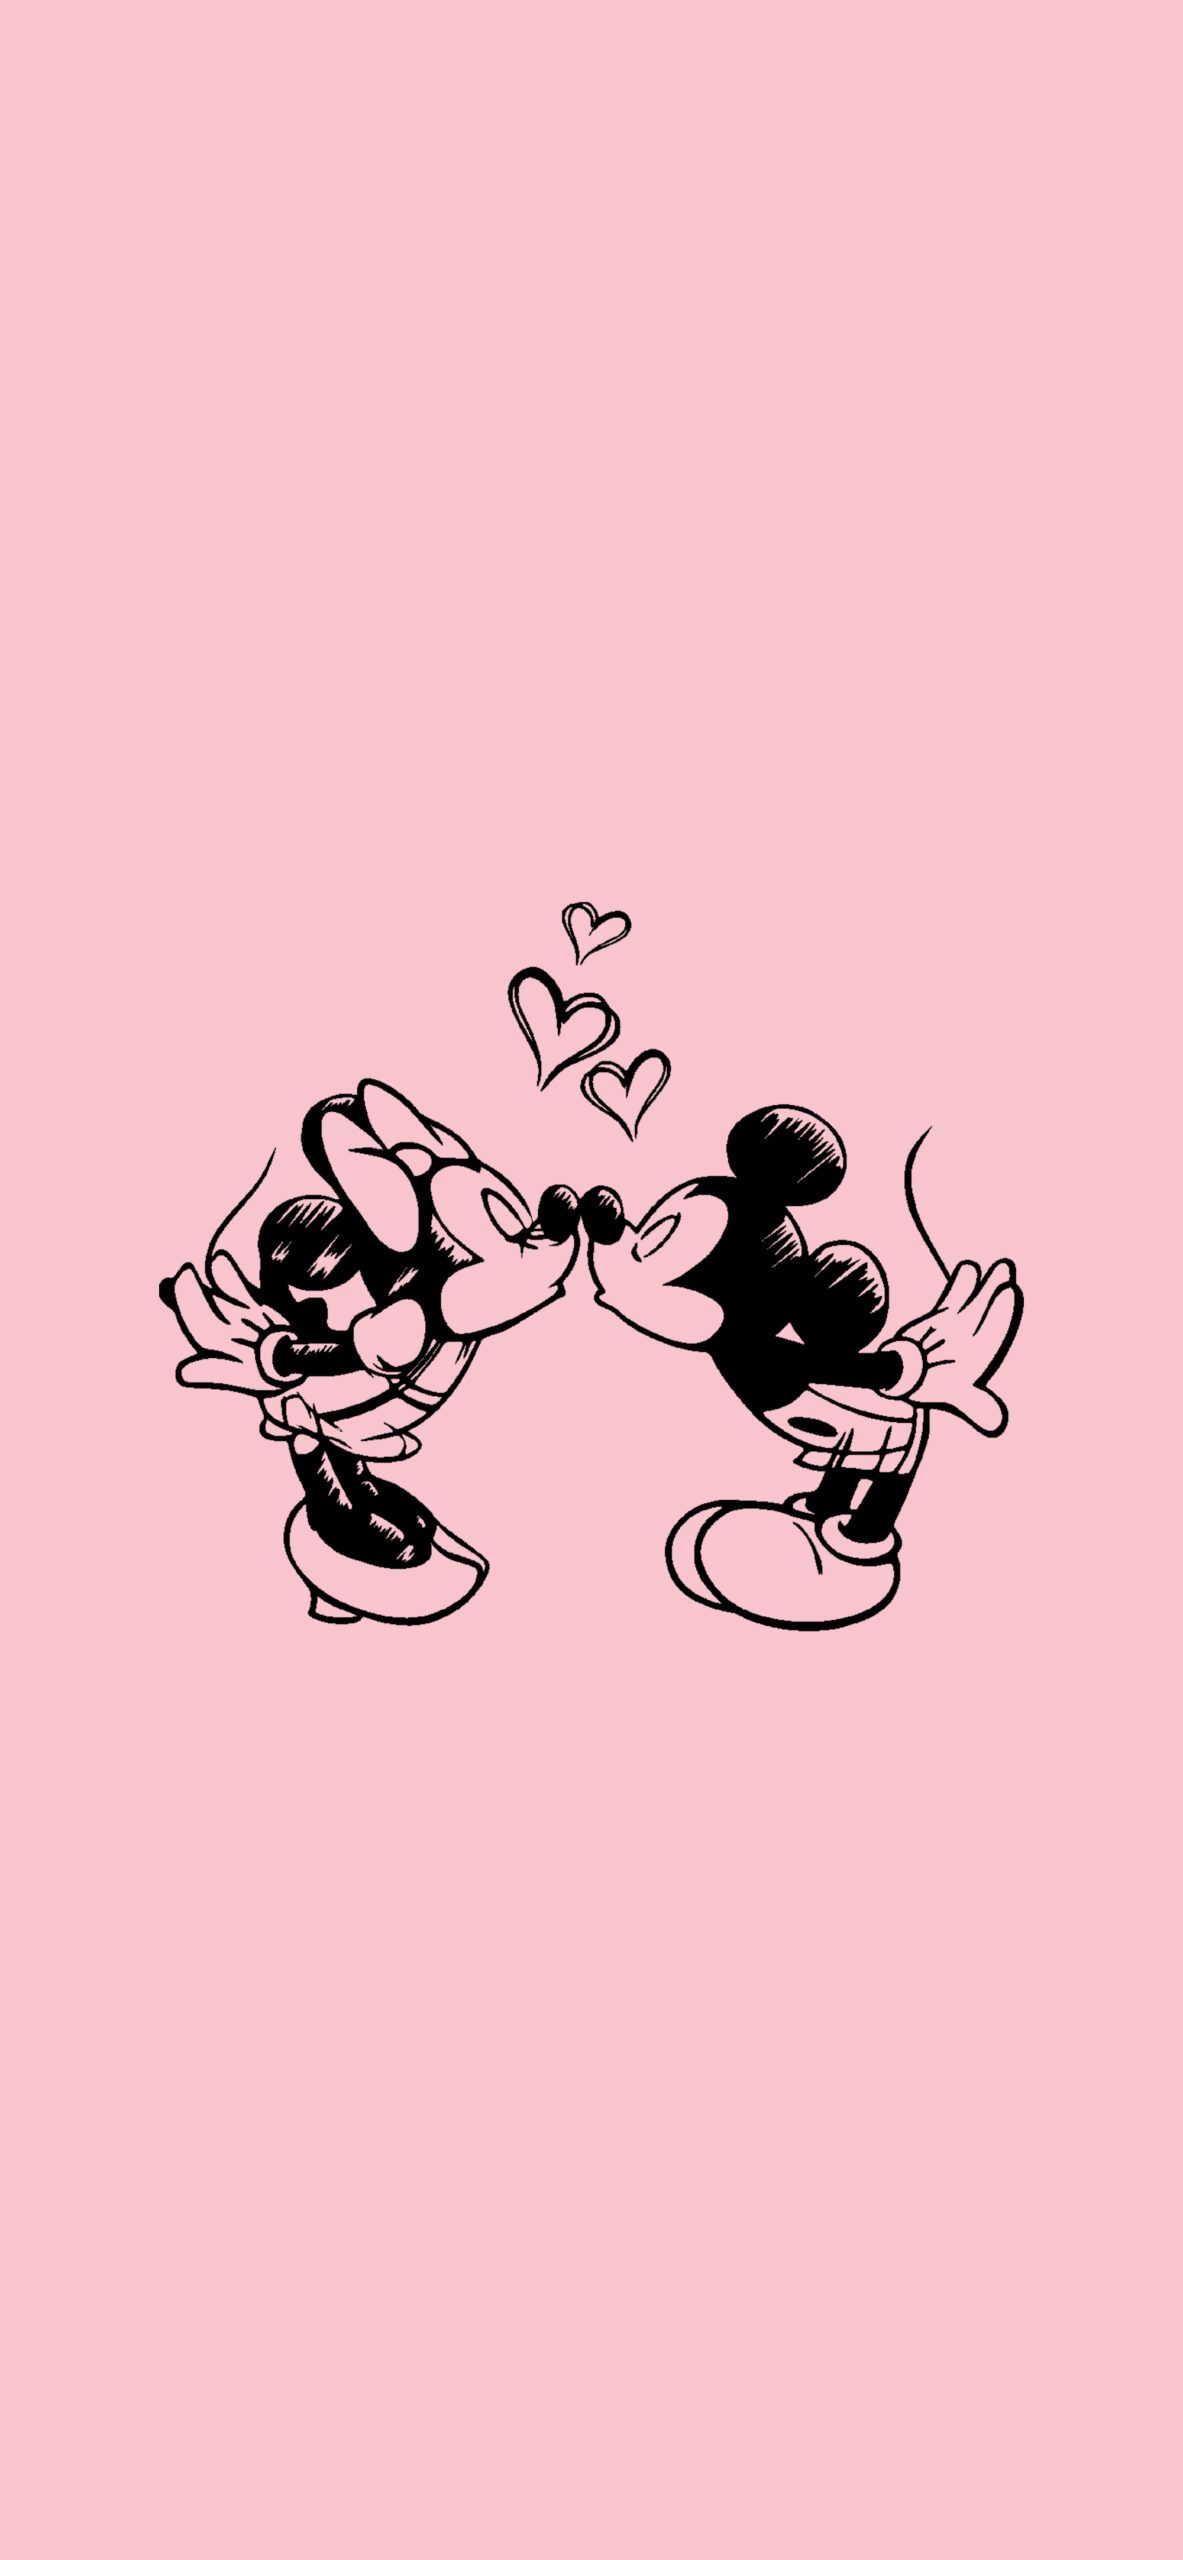 Mickey Mouse and Minnie Mouse kissing on a pink background - Pink, Mickey Mouse, pink phone, Minnie Mouse